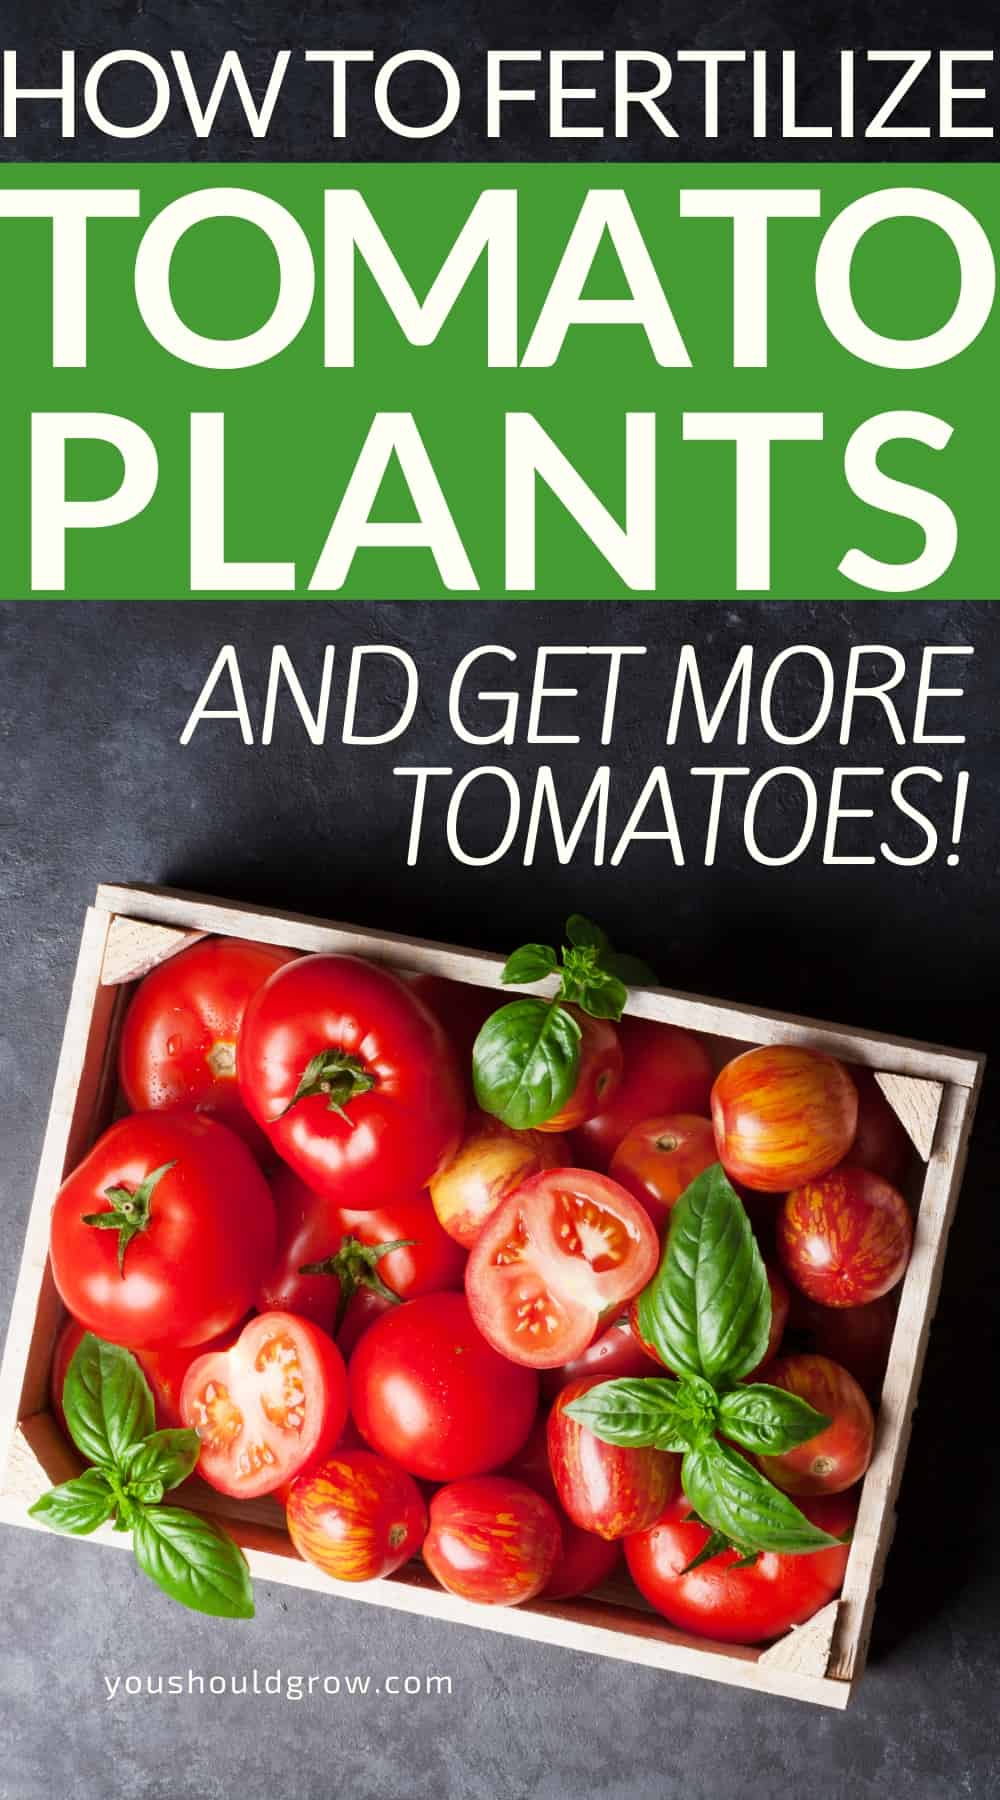 Growing tomatoes is not rewarding unless you get to eat some! Knowing how to fertilize tomatoes will make all the difference in how many tomatoes you get this summer. Homemade tomato fertilizer ideas and recipes. Want to know how to fertilize tomatoes? Get the tips and tricks you need to know here.

Beginner gardening, vegetable gardening tips